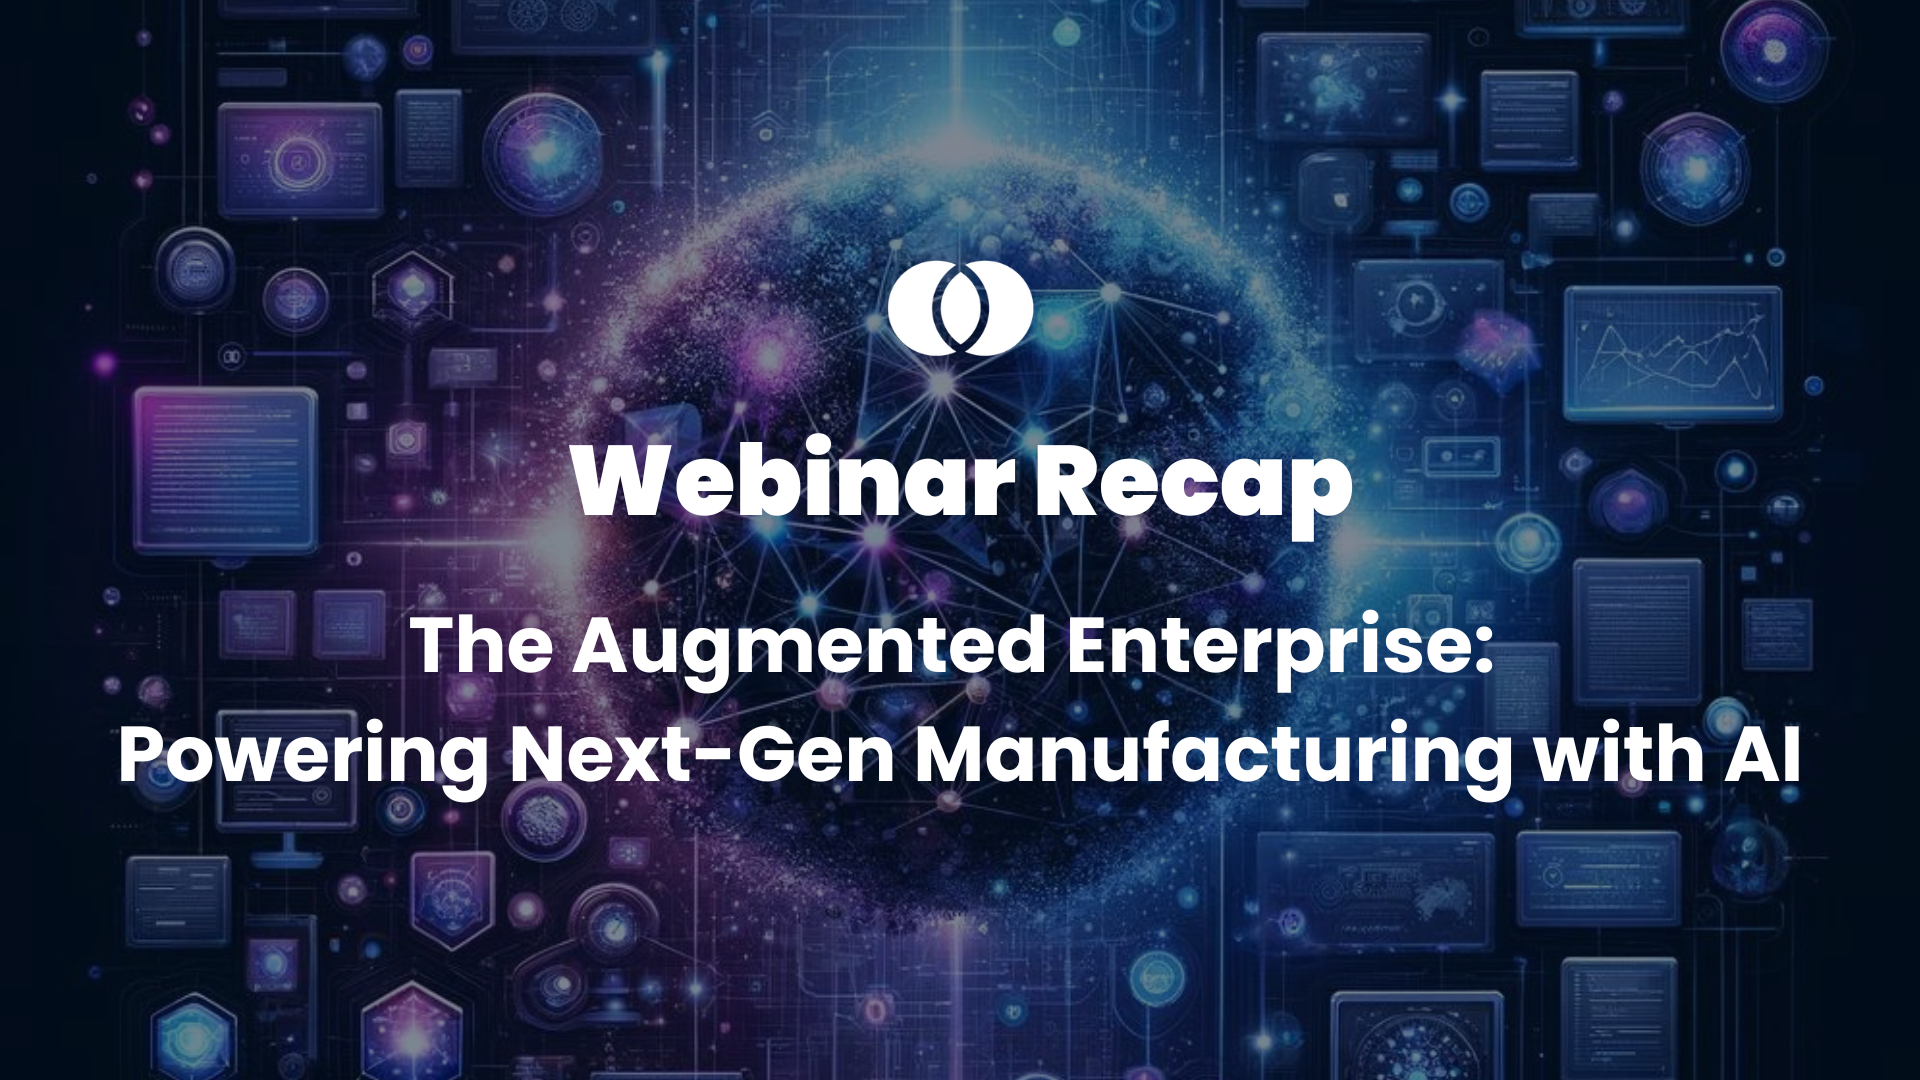 The Augmented Enterprise: Powering Next-Gen Manufacturing with AI